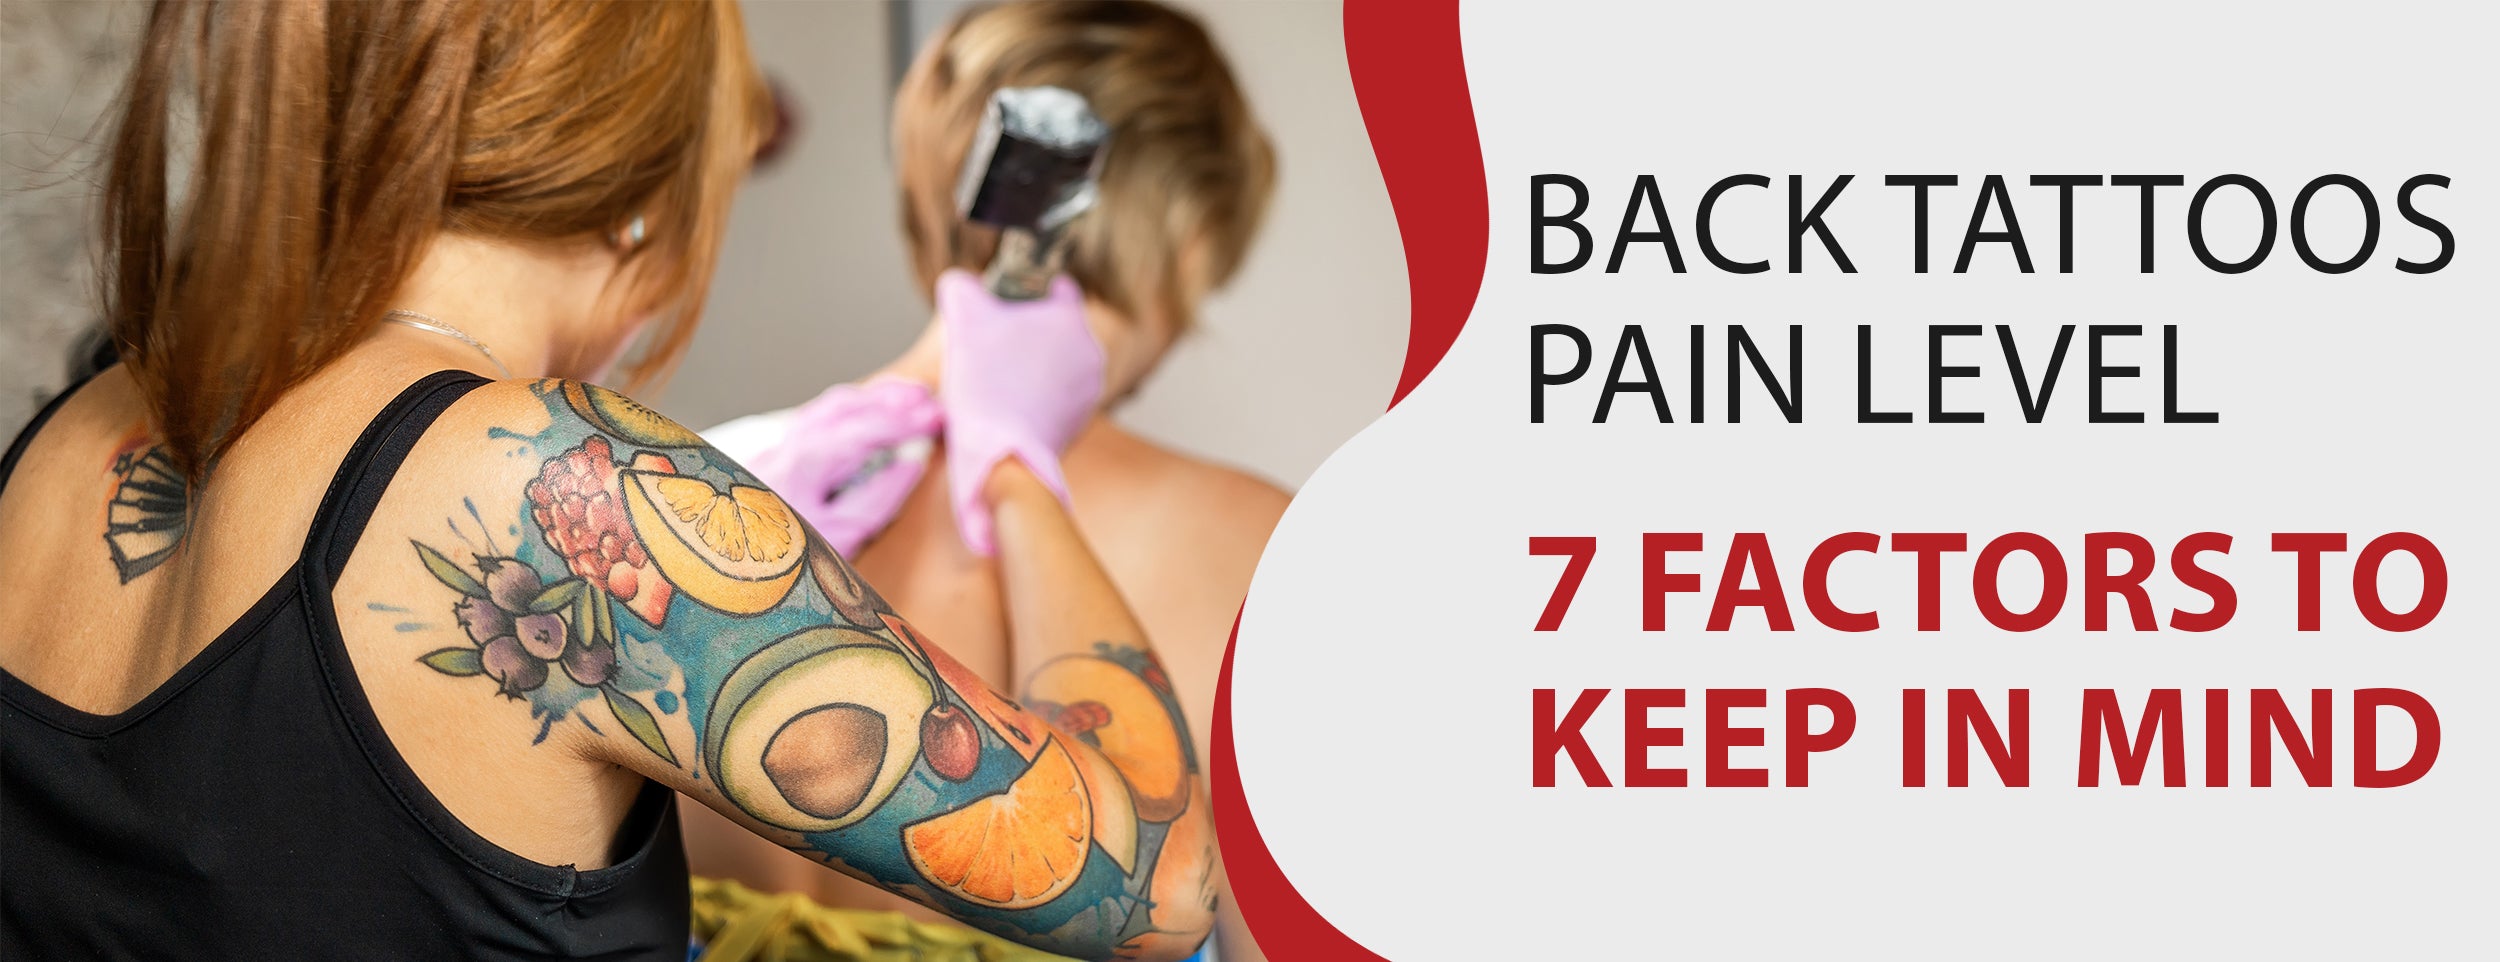 Back Tattoo Designs & Ideas for Men and Women